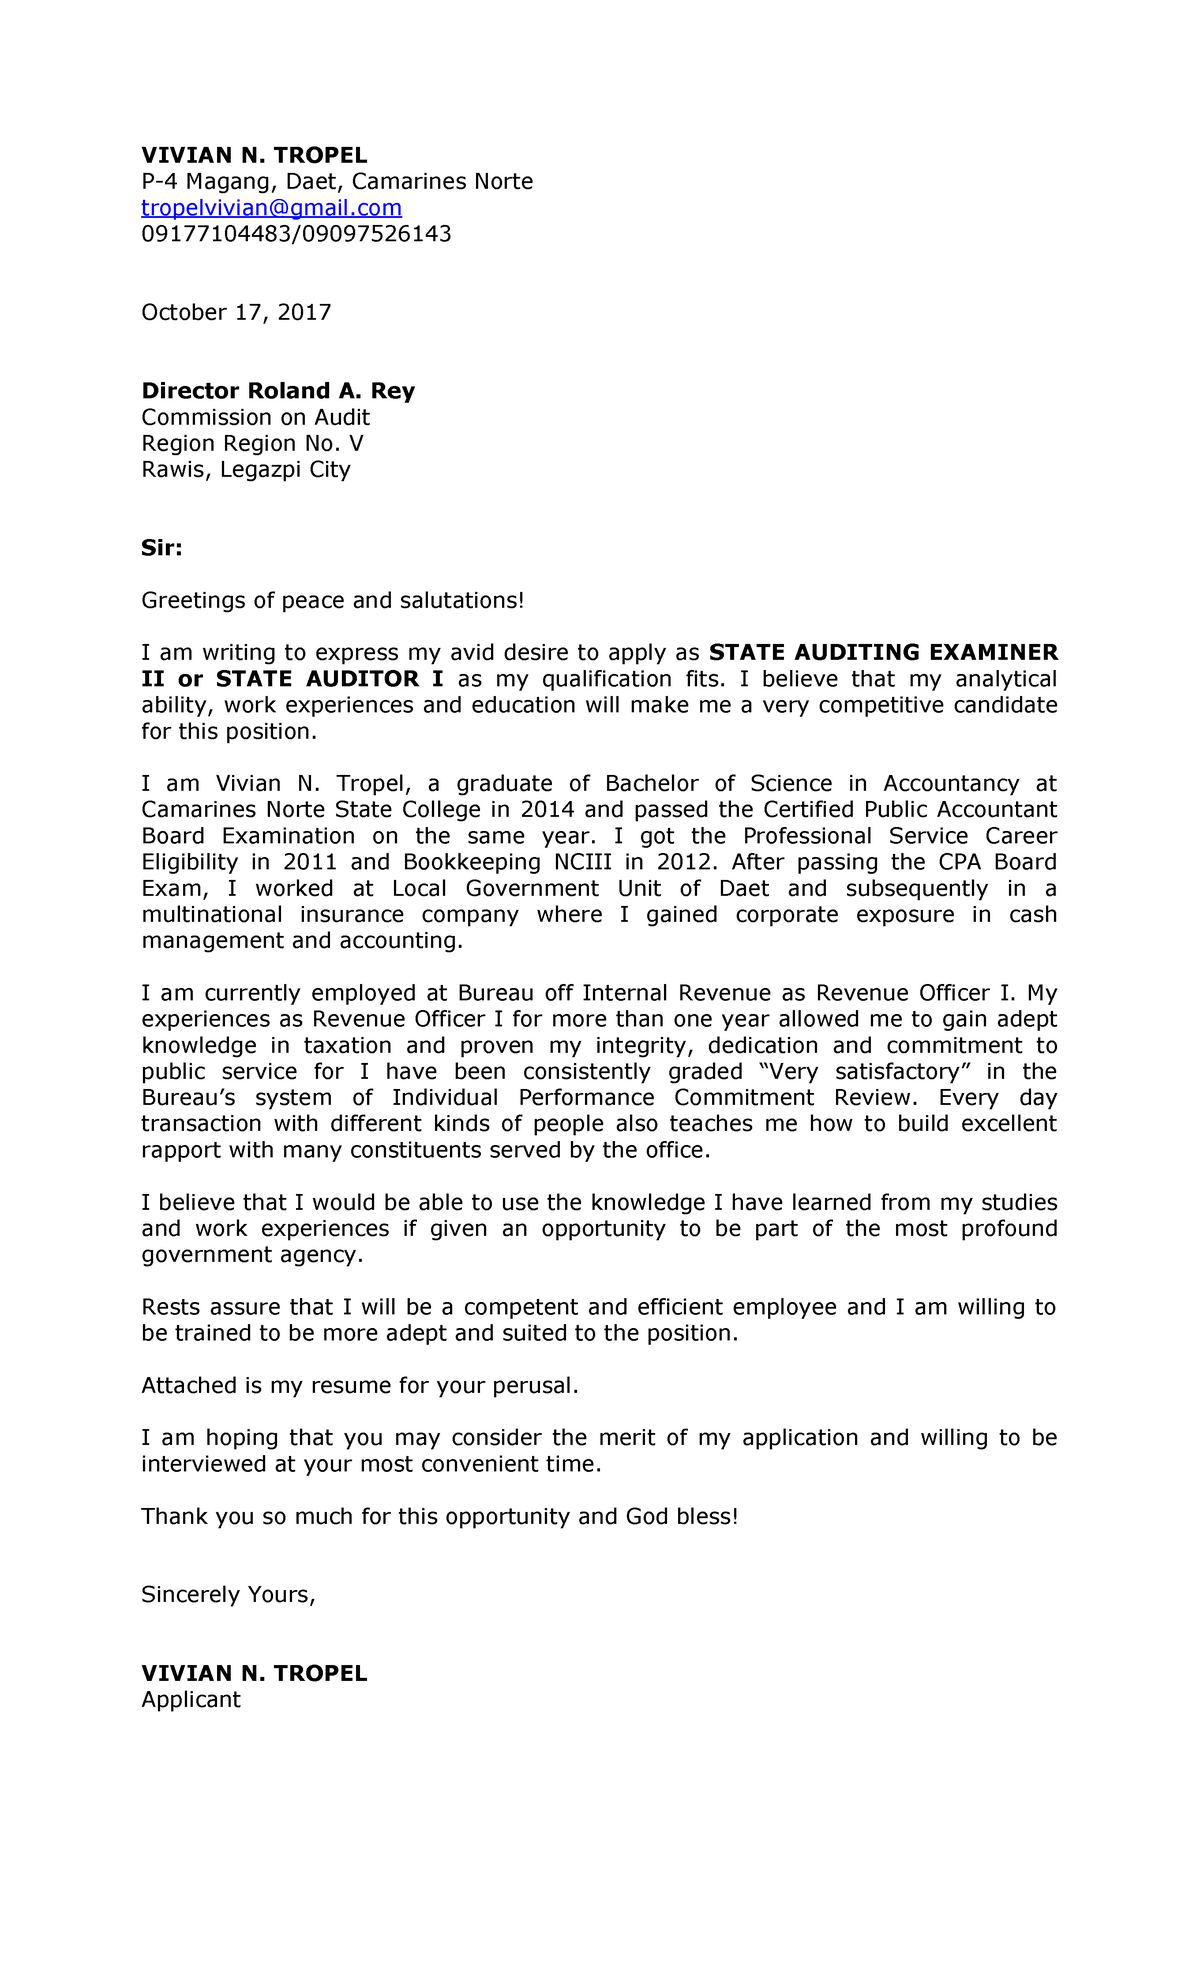 sample application letter for government employment in the philippines